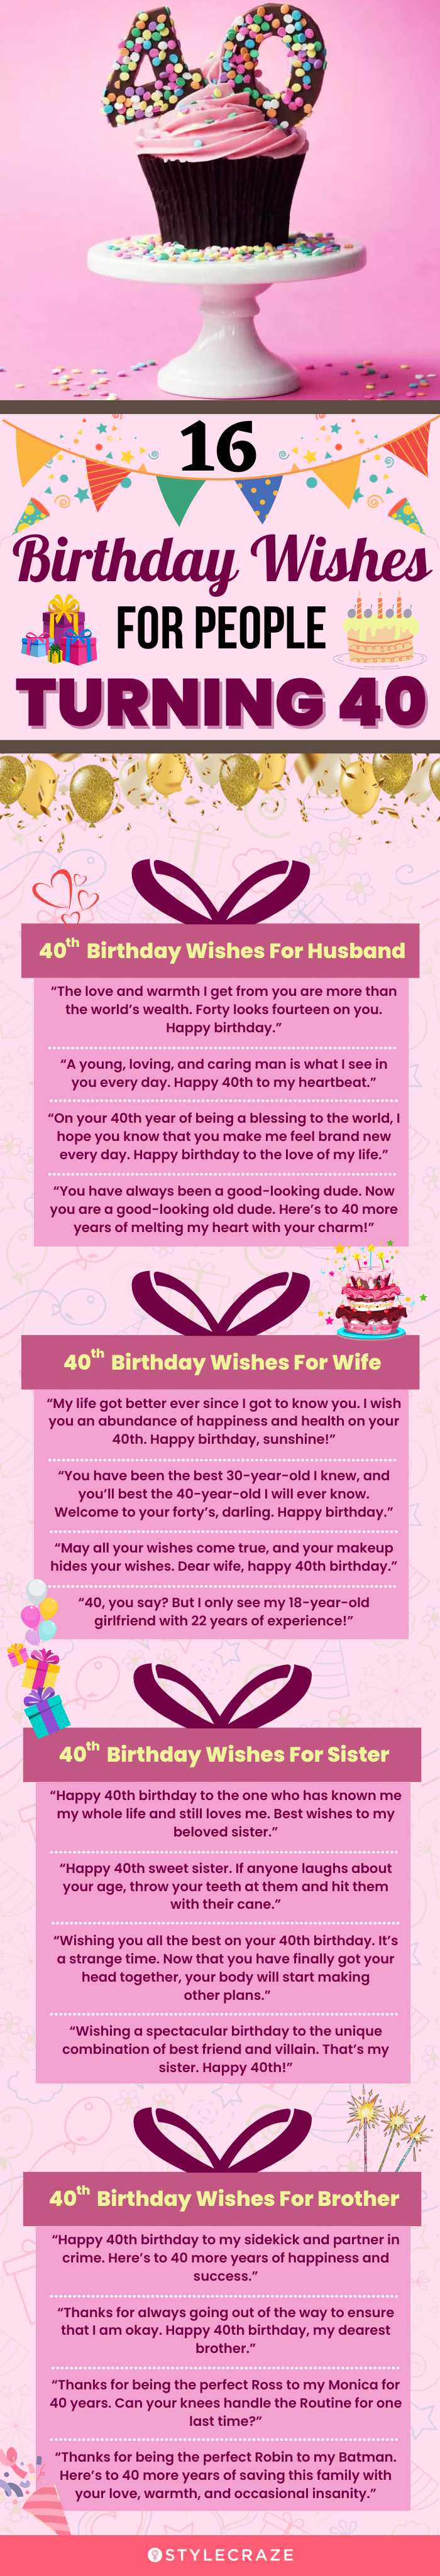 16 birthday wishes for people turning 40 (infographic)